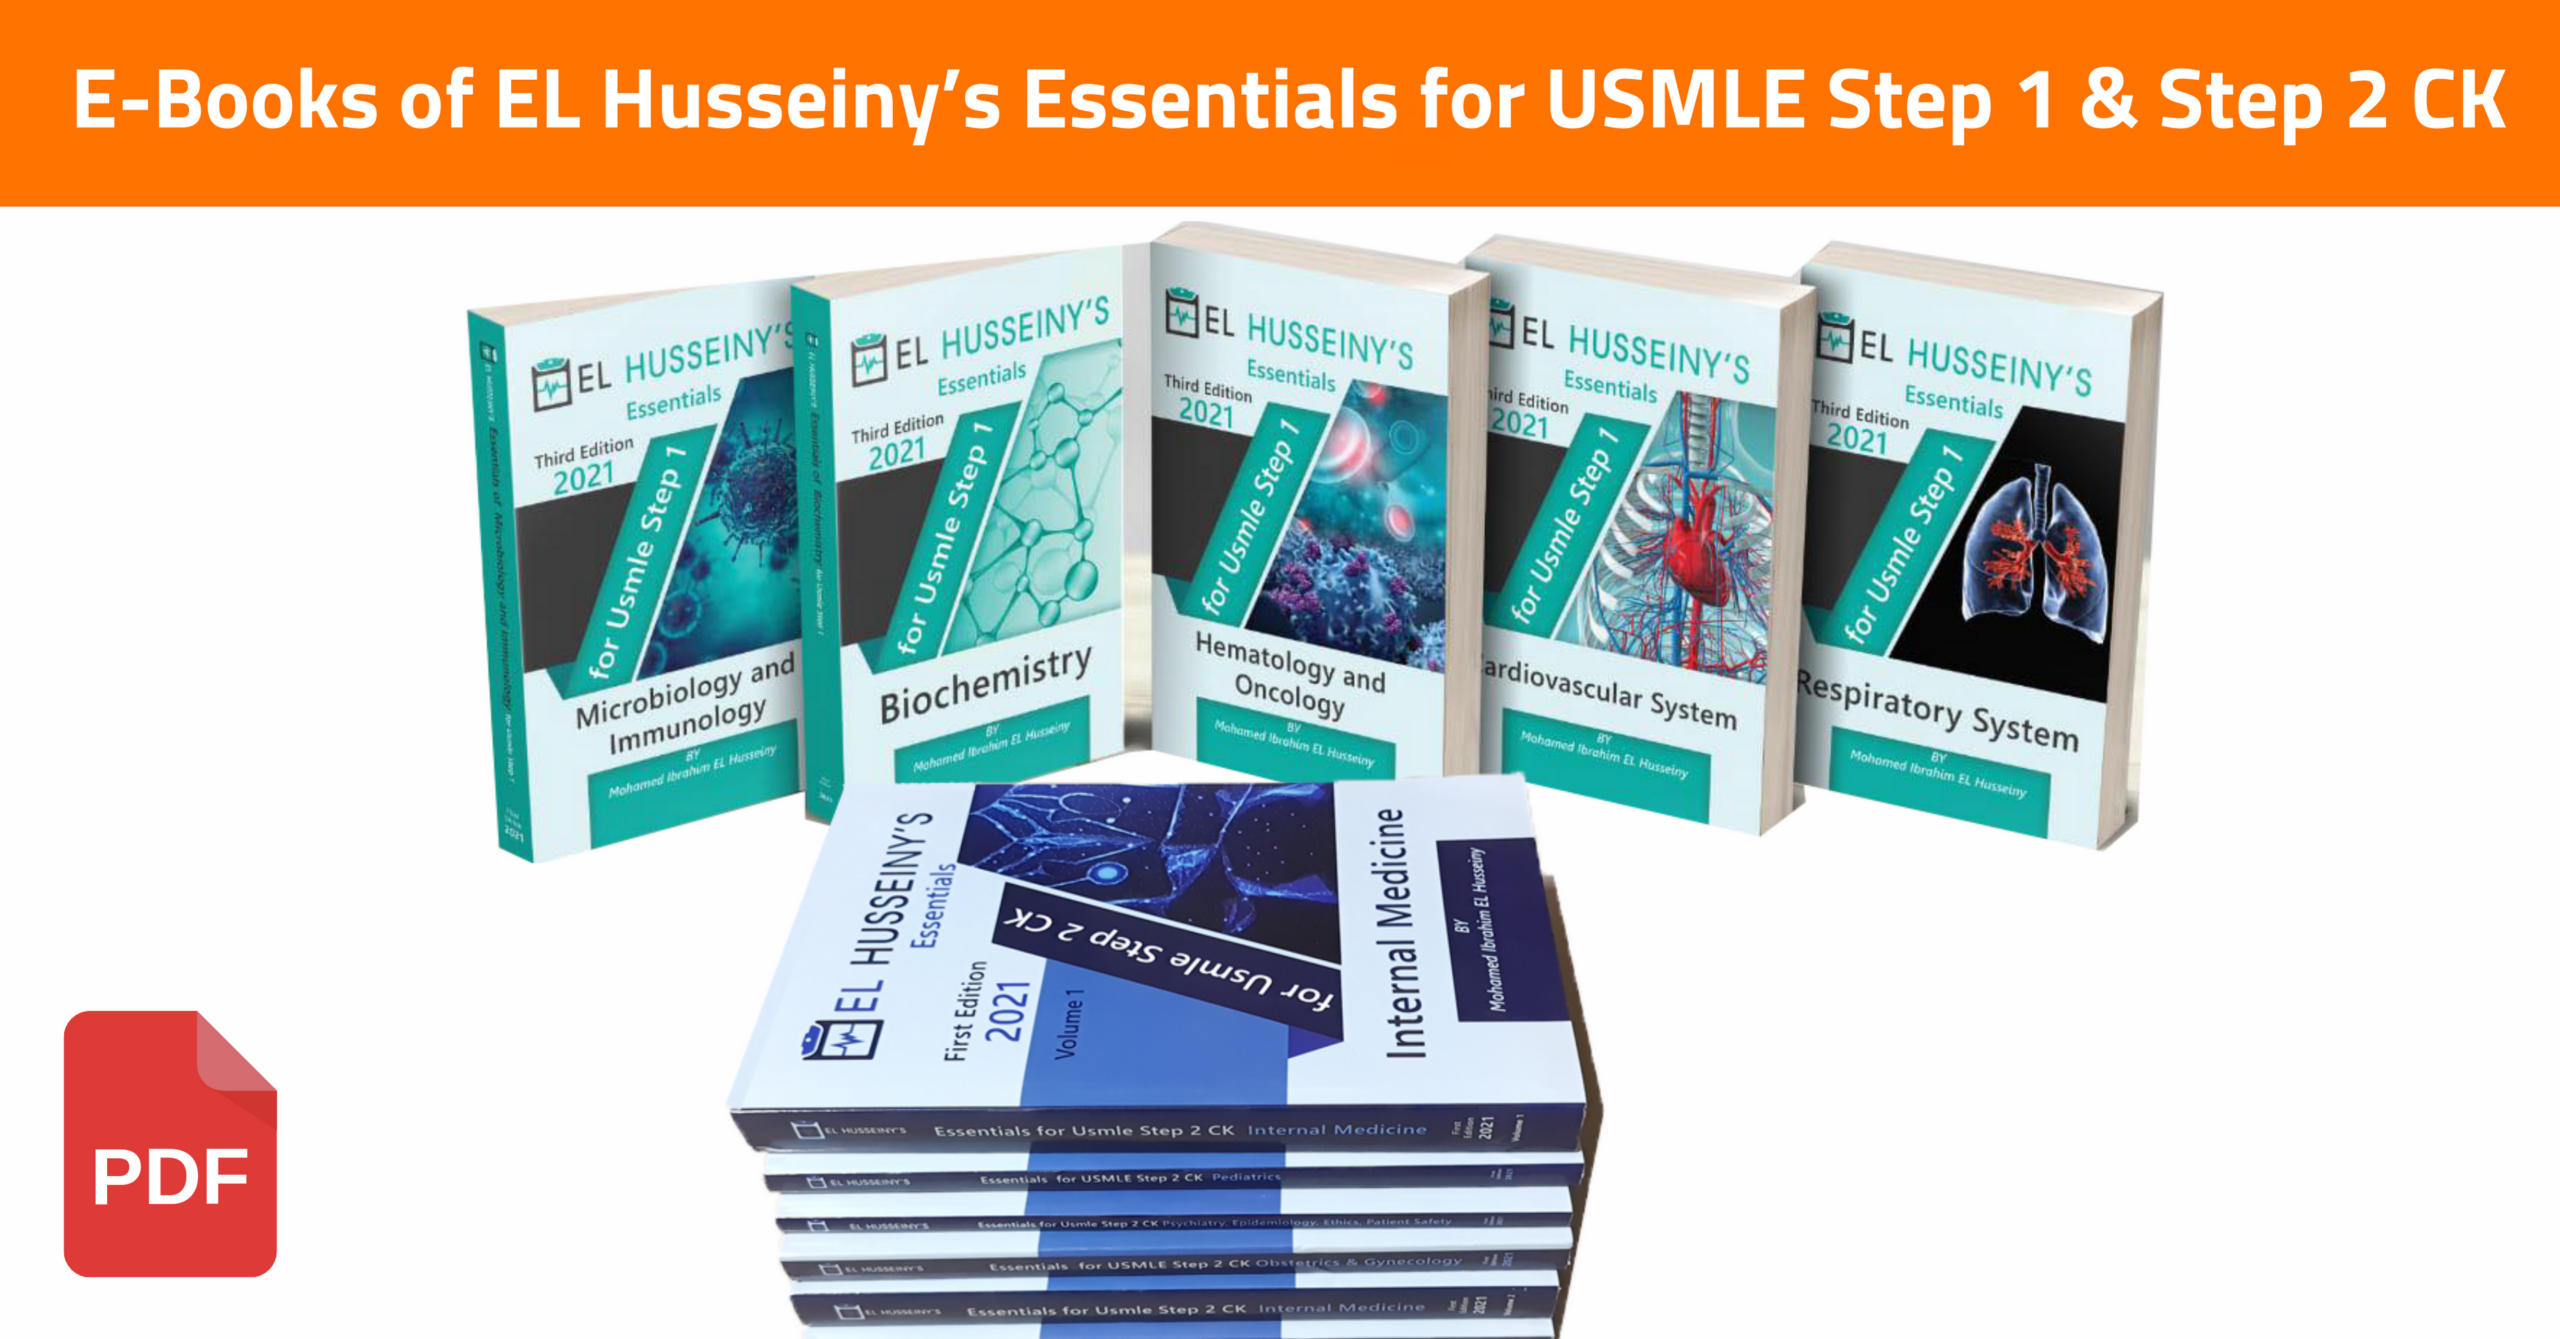 Lifetime access to the updated E-Books of EL Husseiny's Essentials for USMLE